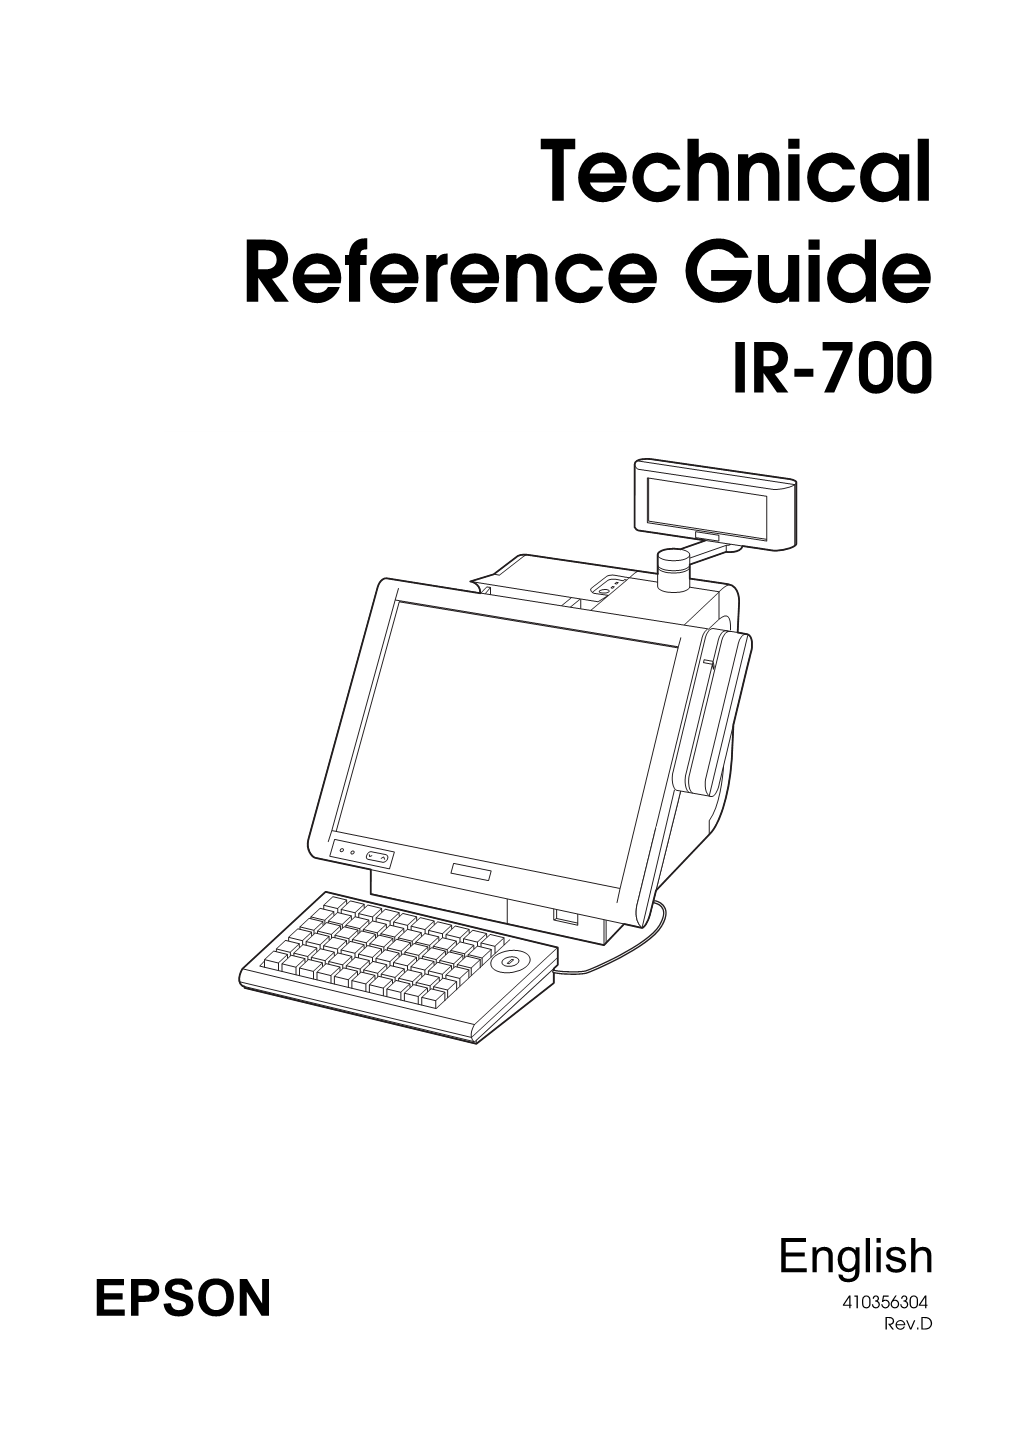 Technical Reference Guide IR-700